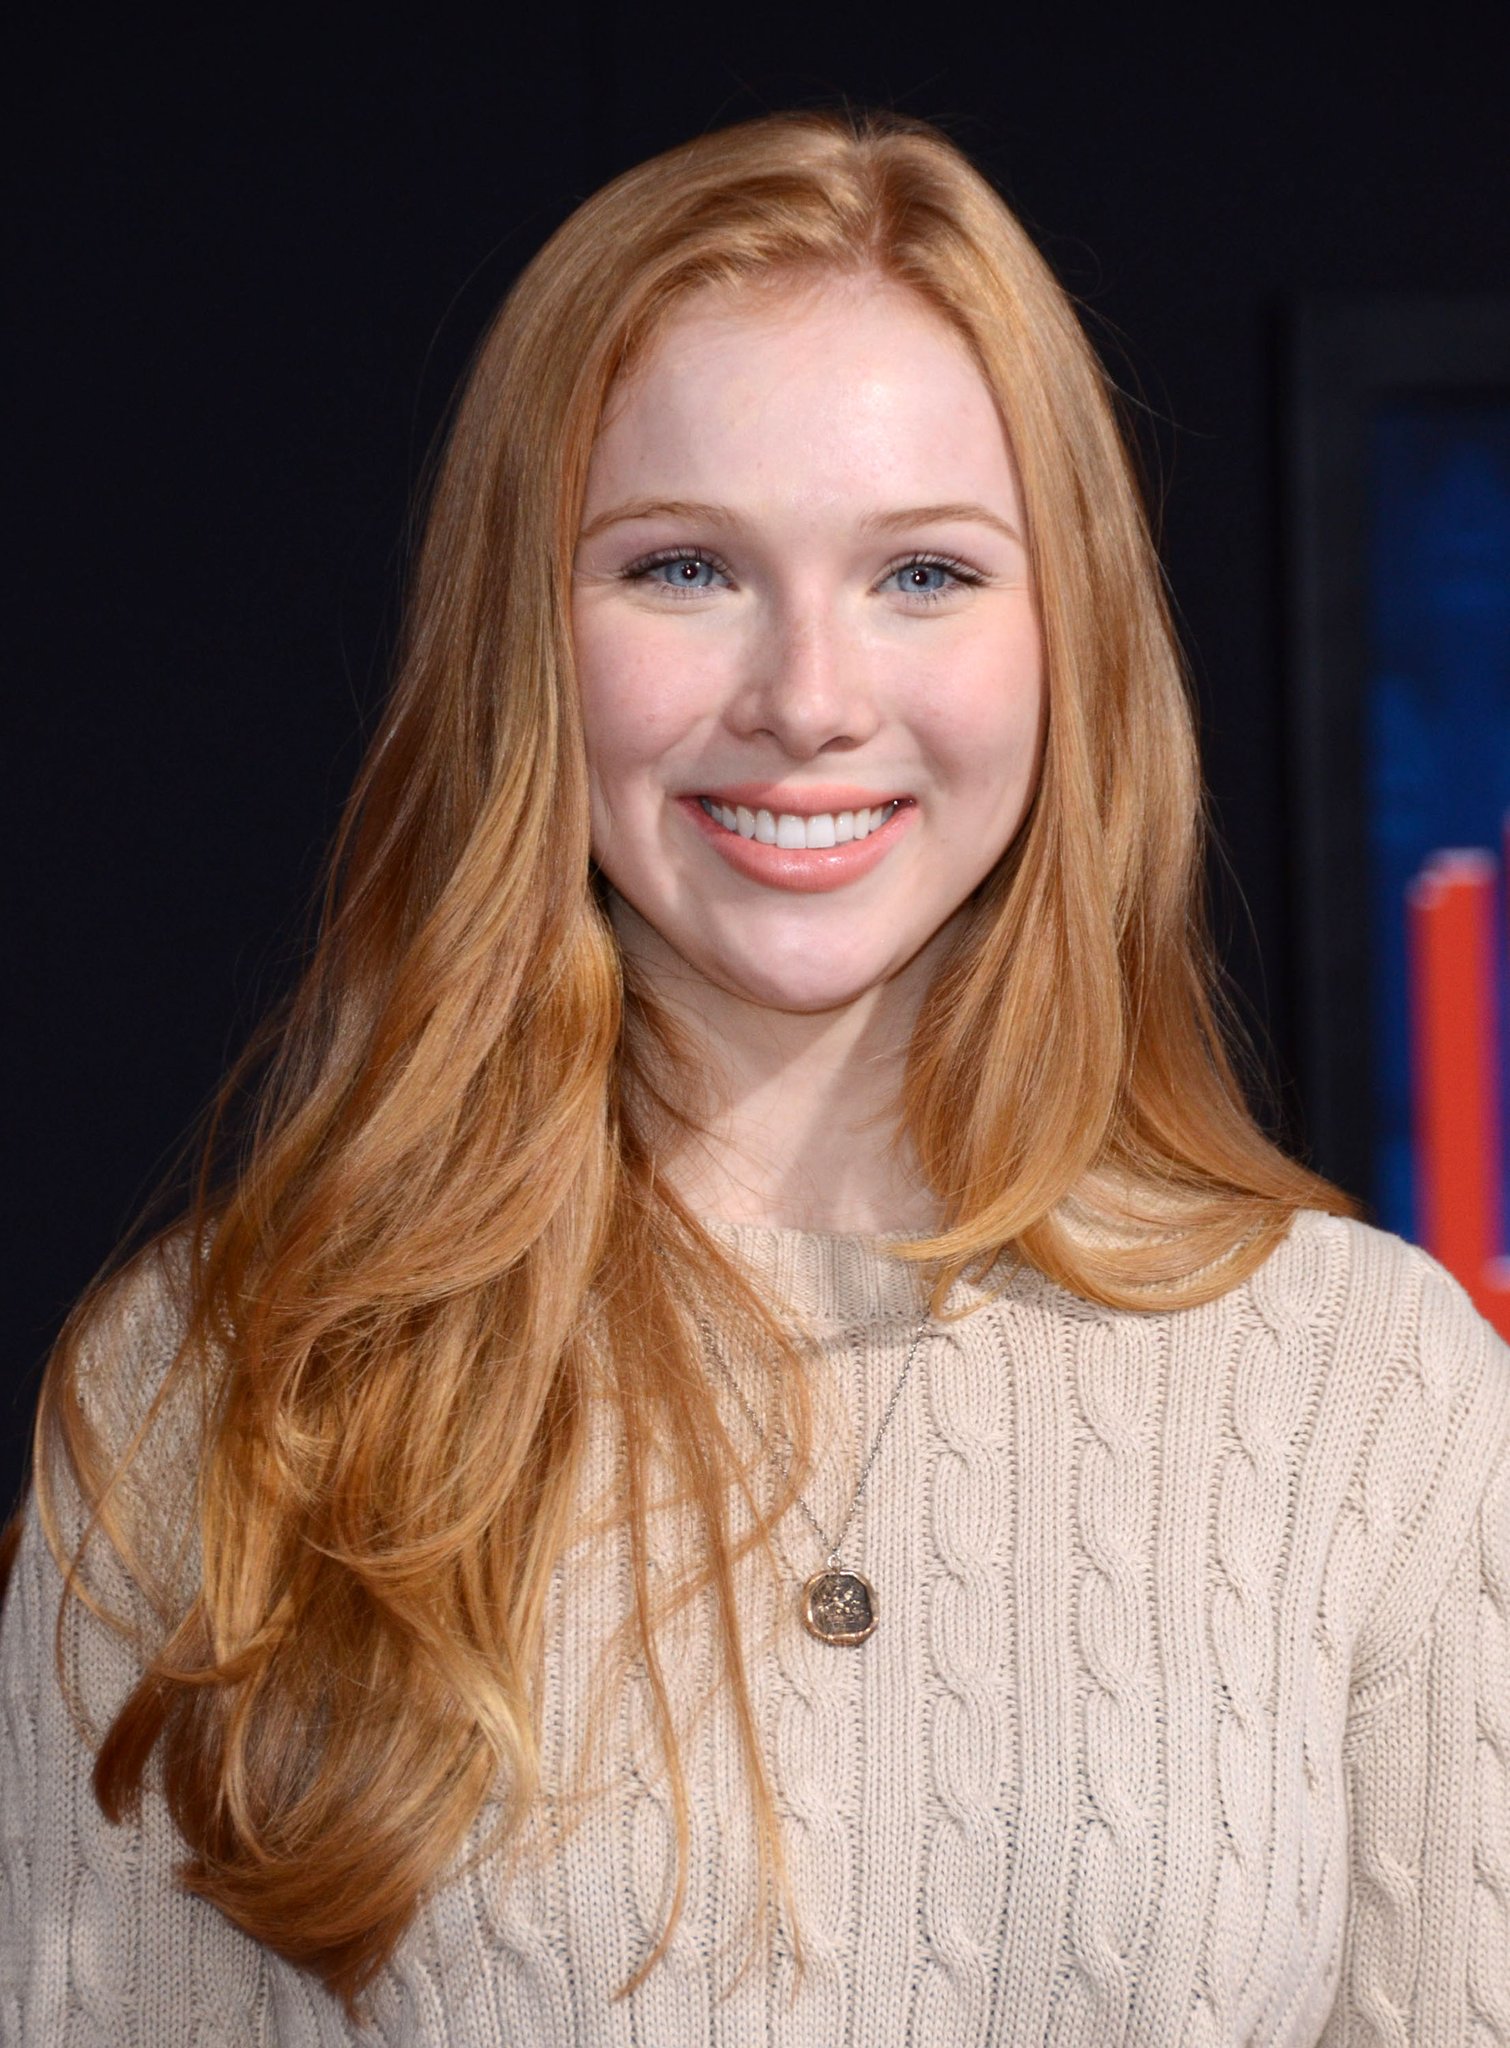 Happy Birthday to Molly Quinn who turns 27 today! 